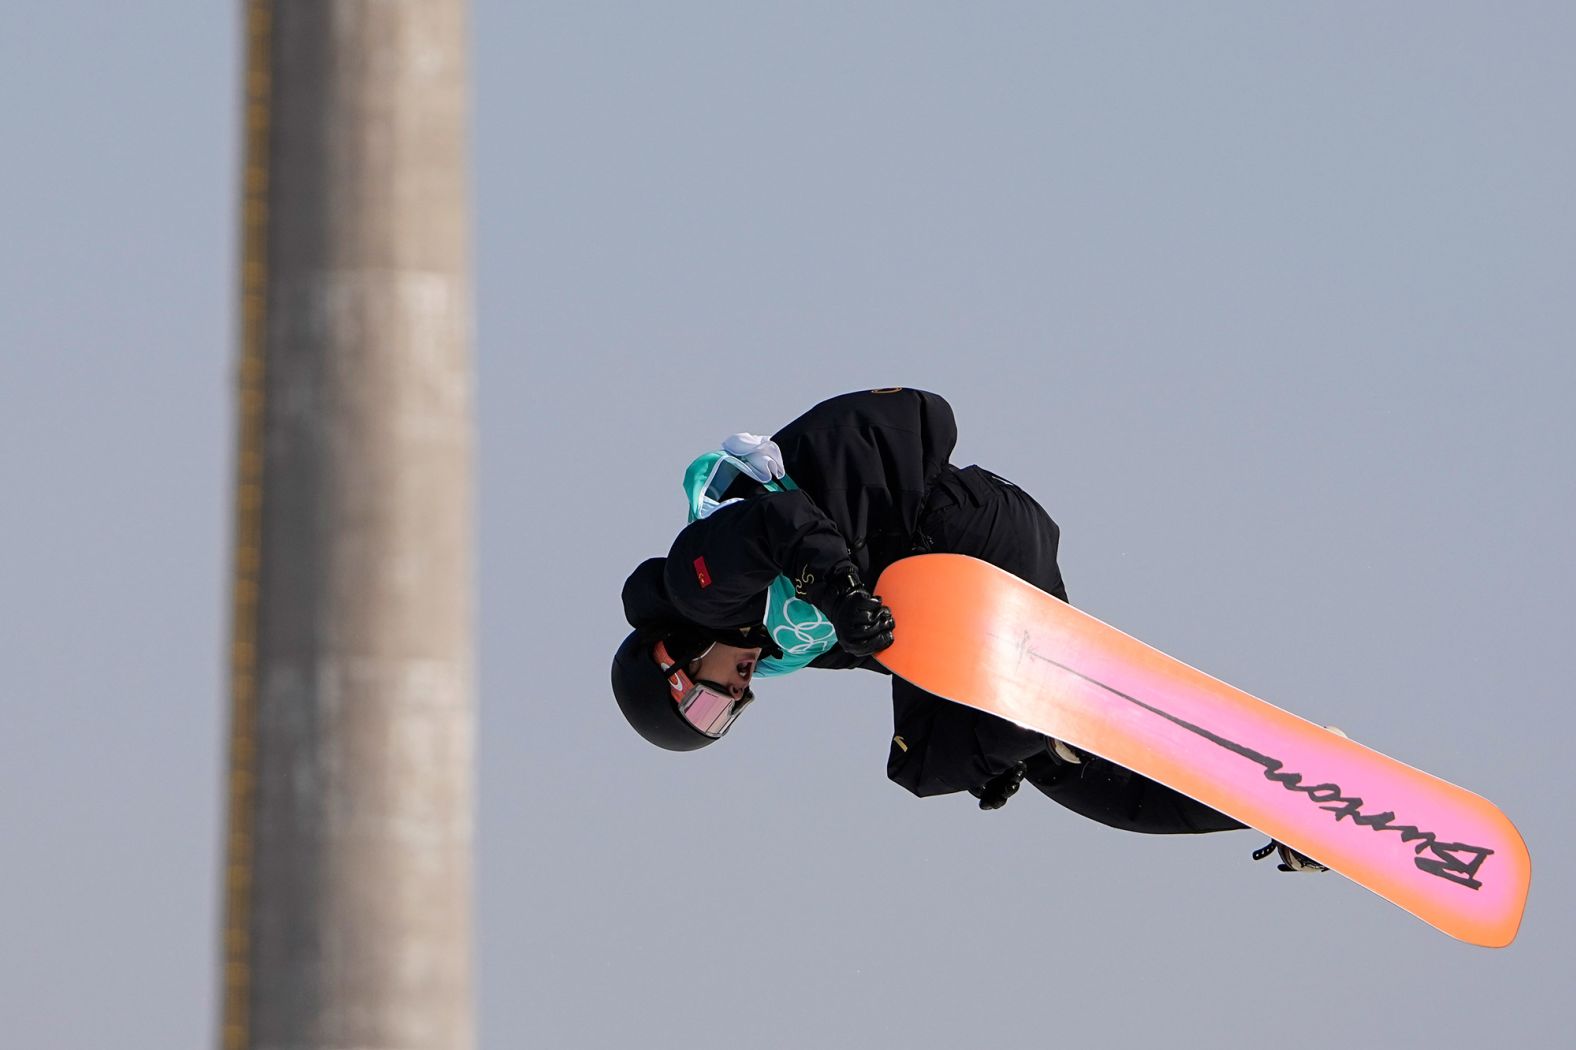 Chinese snowboarder Su Yiming performs a trick on his way to <a href="index.php?page=&url=https%3A%2F%2Fwww.cnn.com%2Fworld%2Flive-news%2Fbeijing-winter-olympics-02-15-22-spt%2Fh_2c39a9a7b678e476392e6986e5811b26" target="_blank">winning gold in the big air event</a> on February 15. Su won a silver in the slopestyle earlier in these Games.